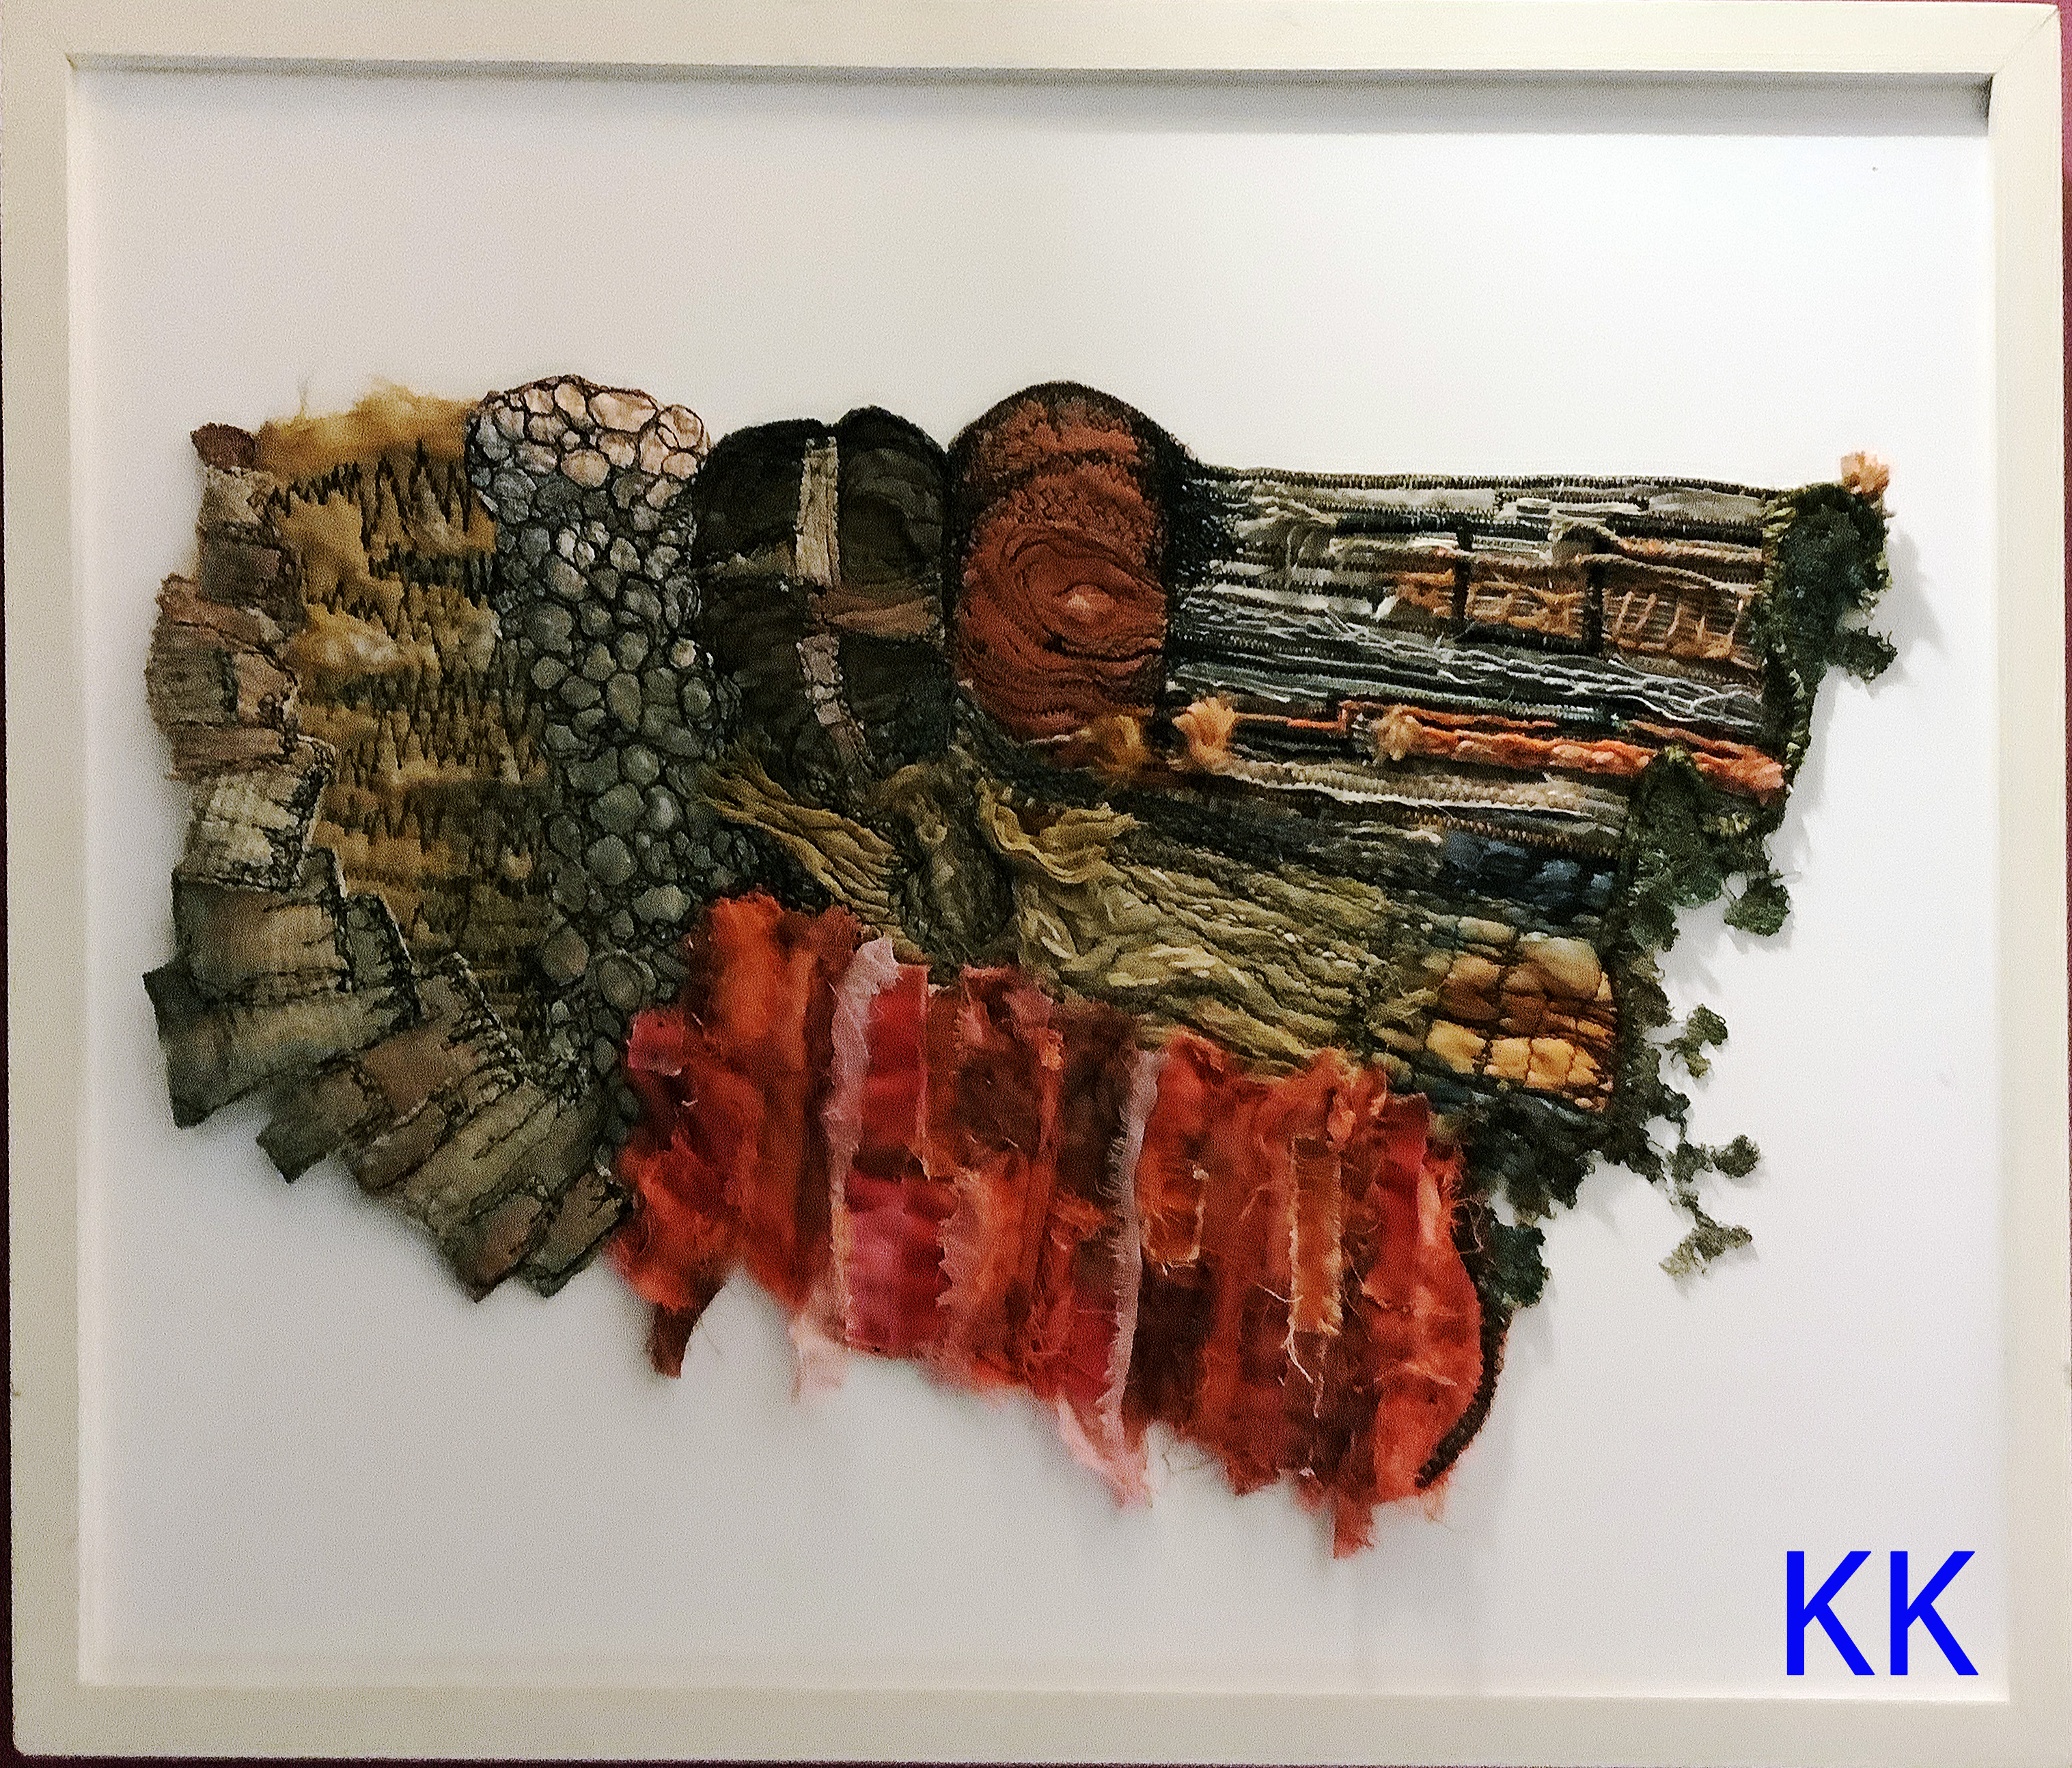 ABSTRACT SECTION OF A CLIFF FACE ANGLESEY, hand dyed fabrics with couching, appliqué, fabric manipulation with hand and free machine stitching.